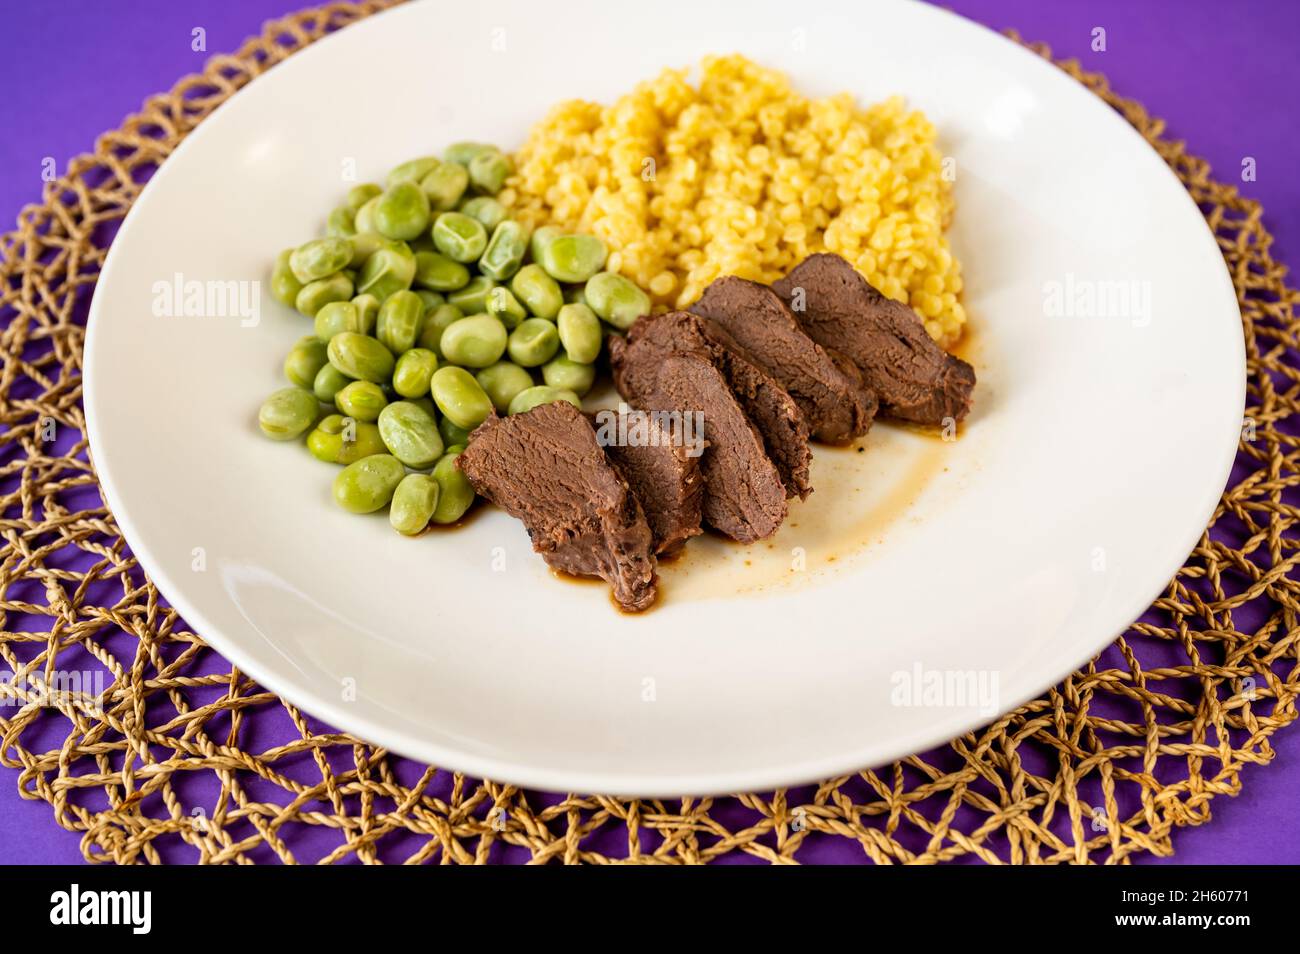 Sliced lean deer meat, boiled broad bean and semolina pasta 'tarhona' on plate on circle bamboo pad on table, closeup. Stock Photo